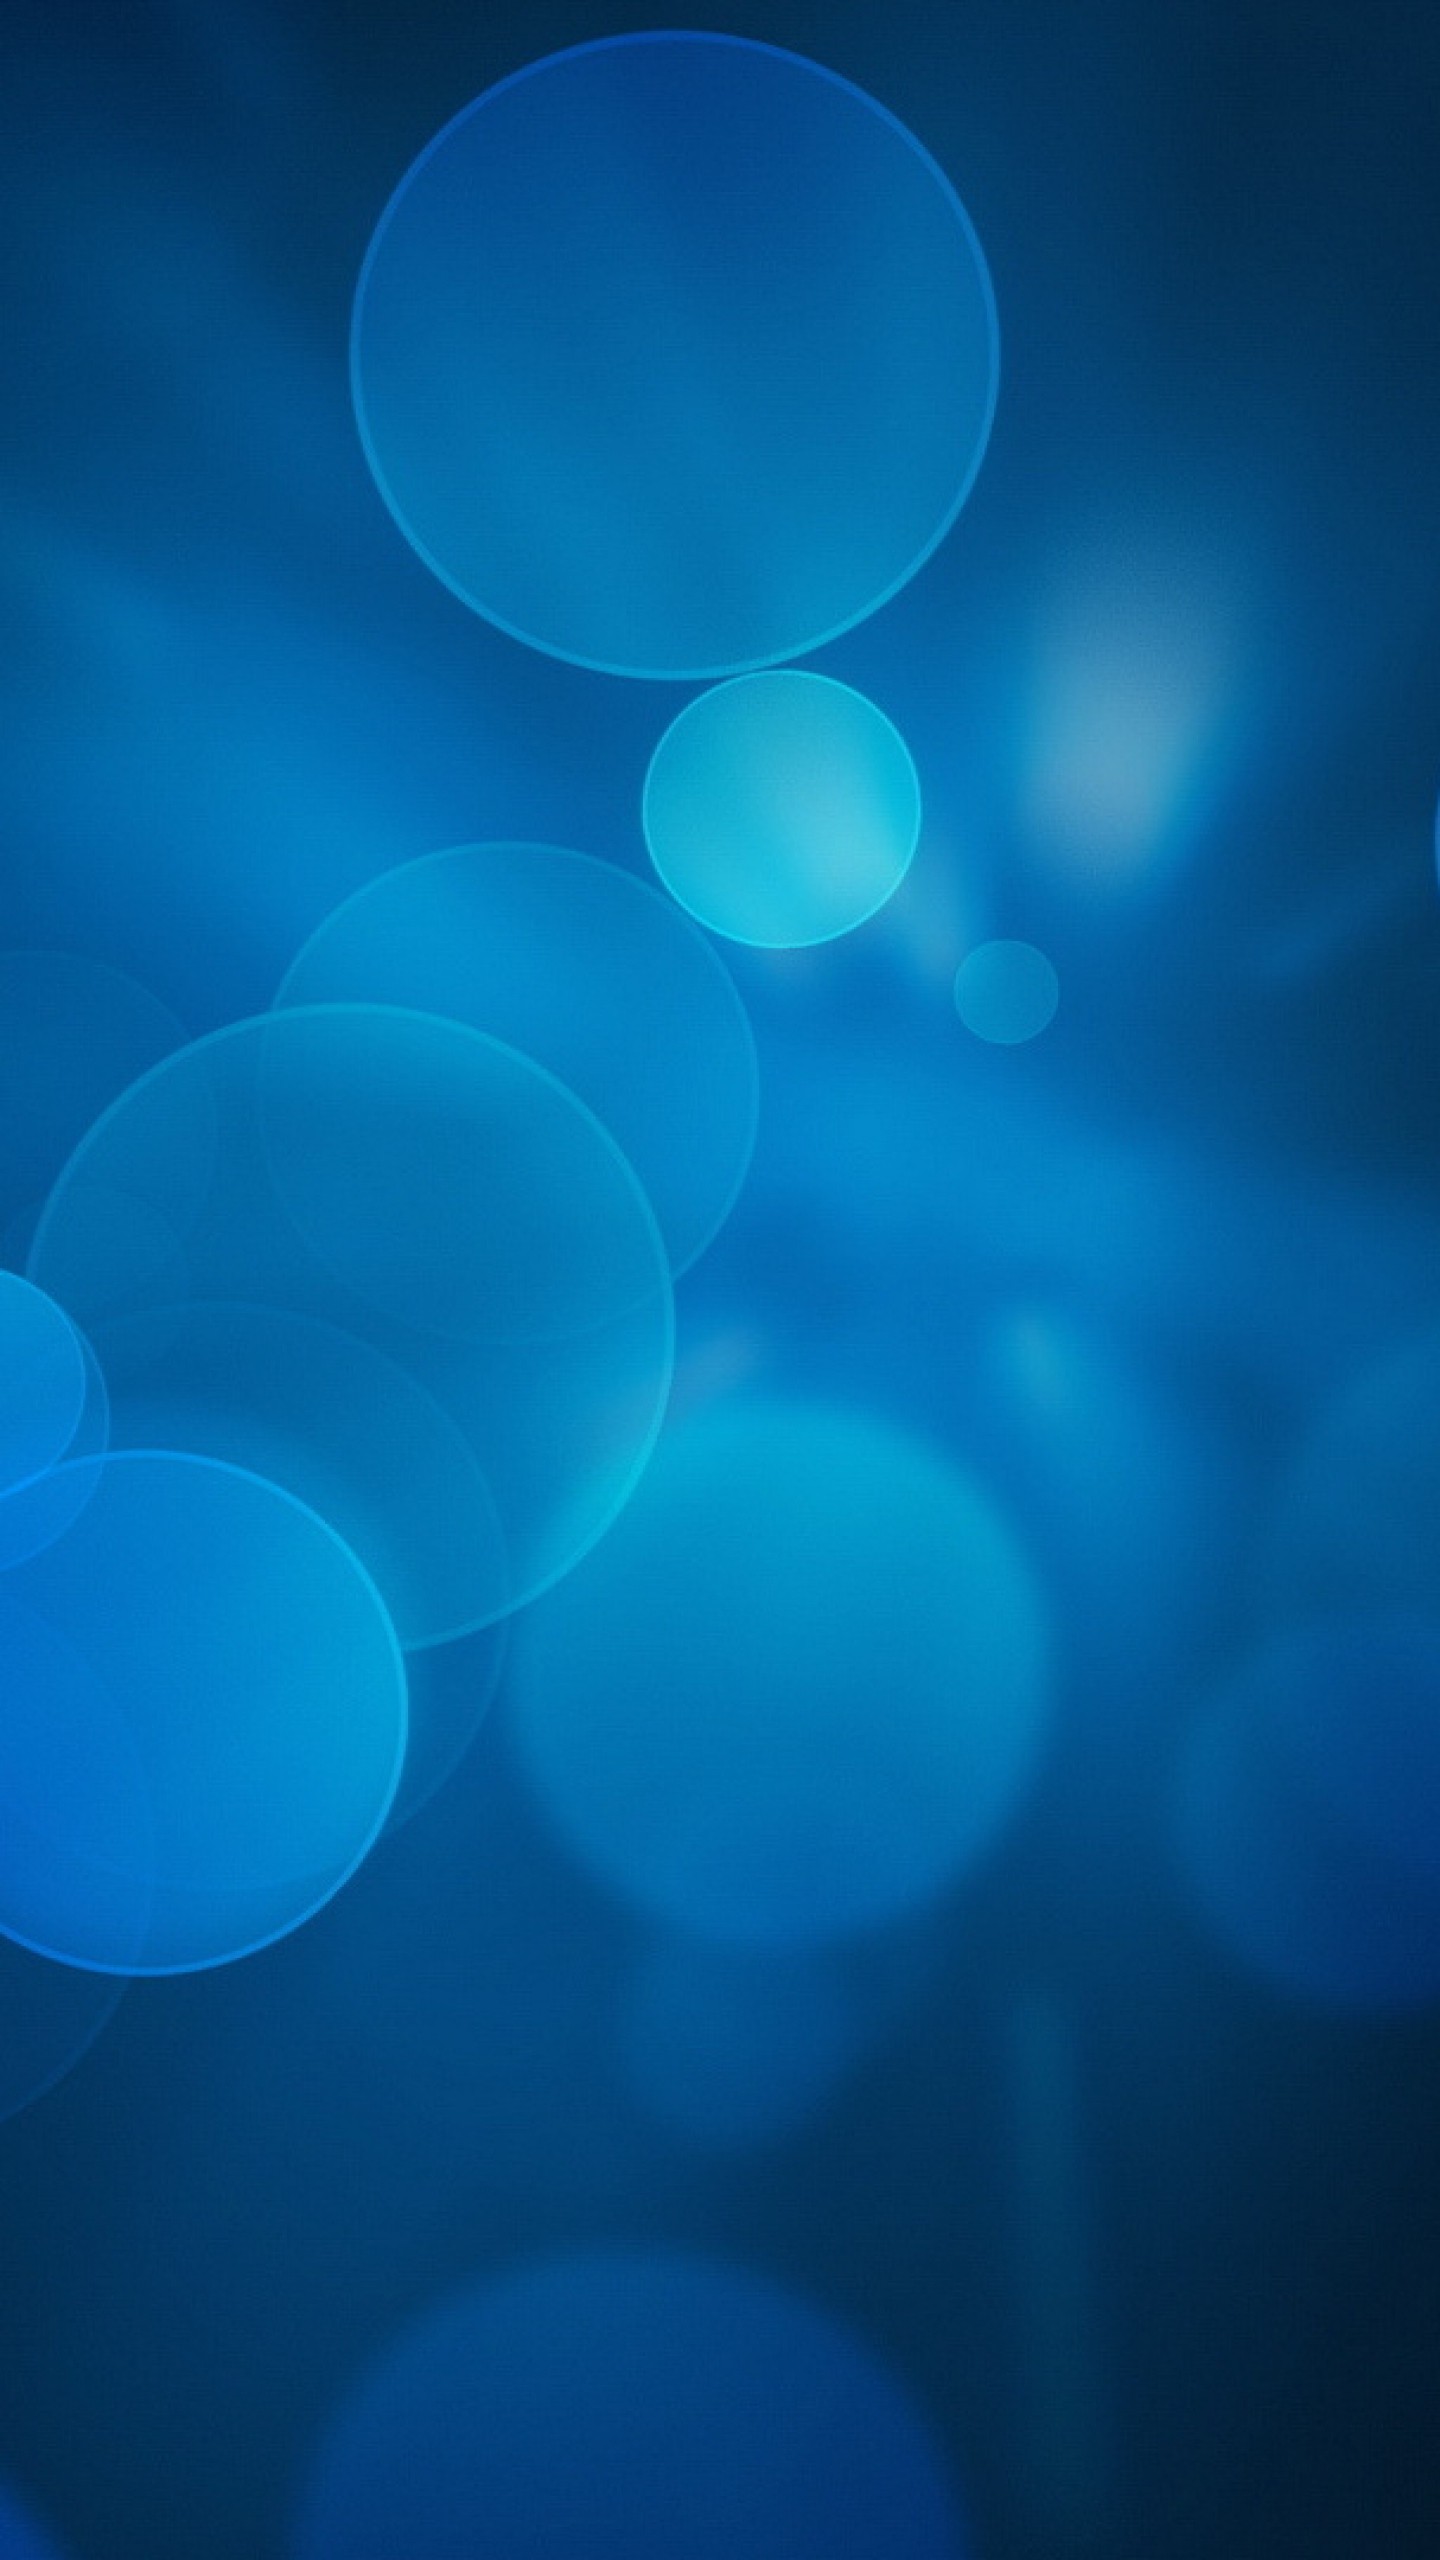 Blue Bubbles Best HD Wallpaper For iPhone And Android Devices